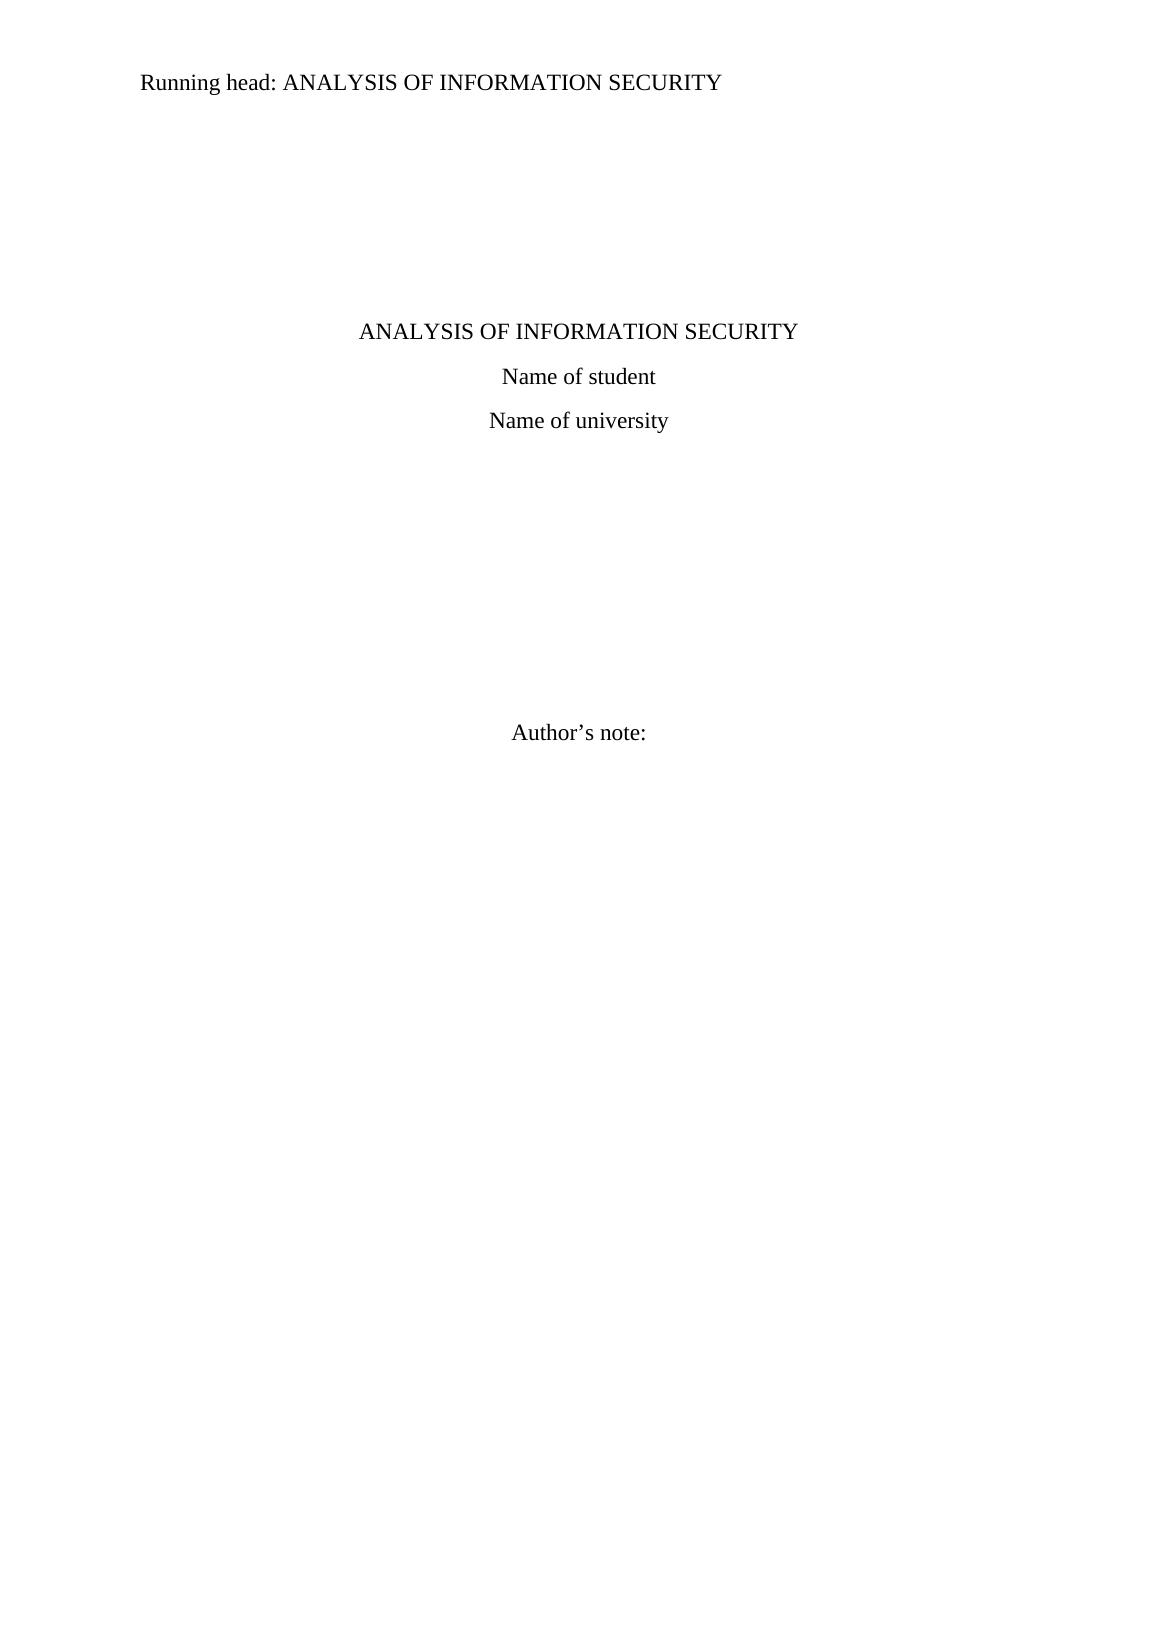 Analysis of Information Security Report_1